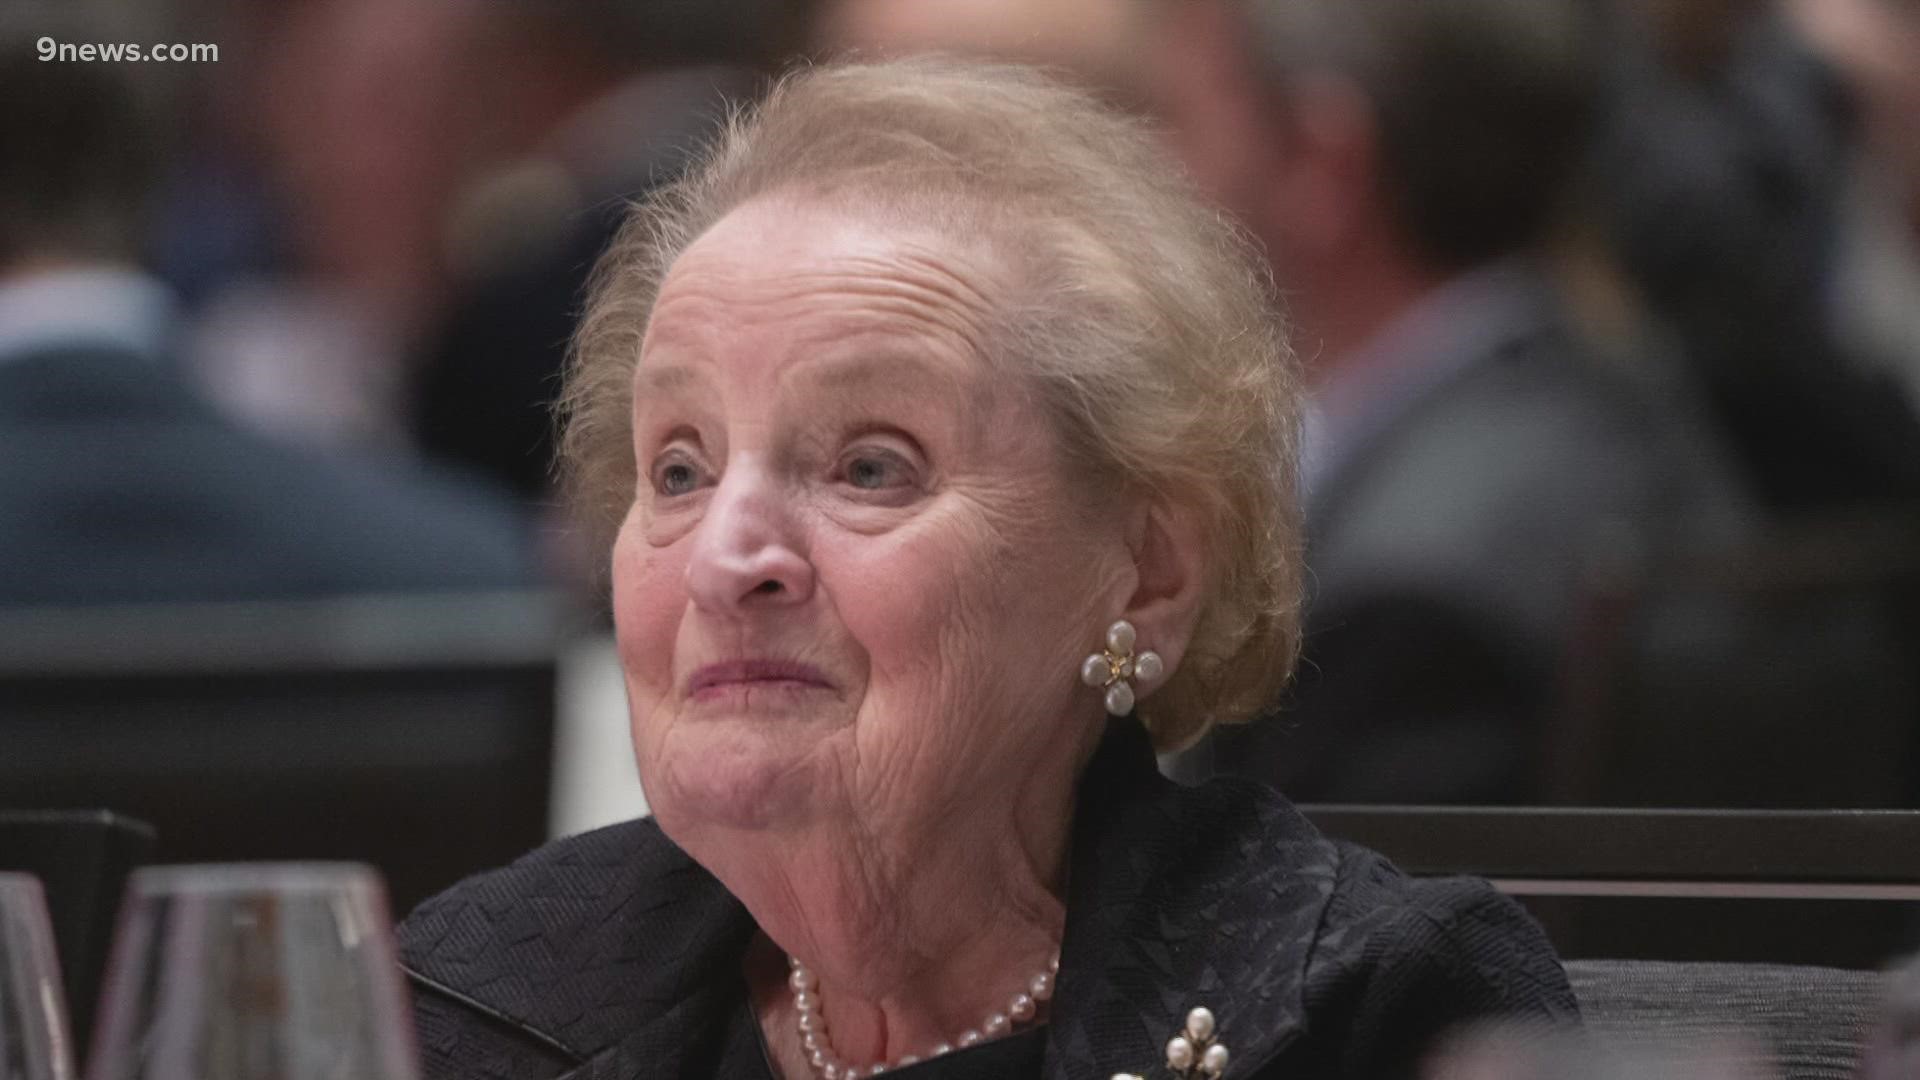 While Albright's career took her all over the globe, she became an American citizen in Denver. She still considered the city her home.